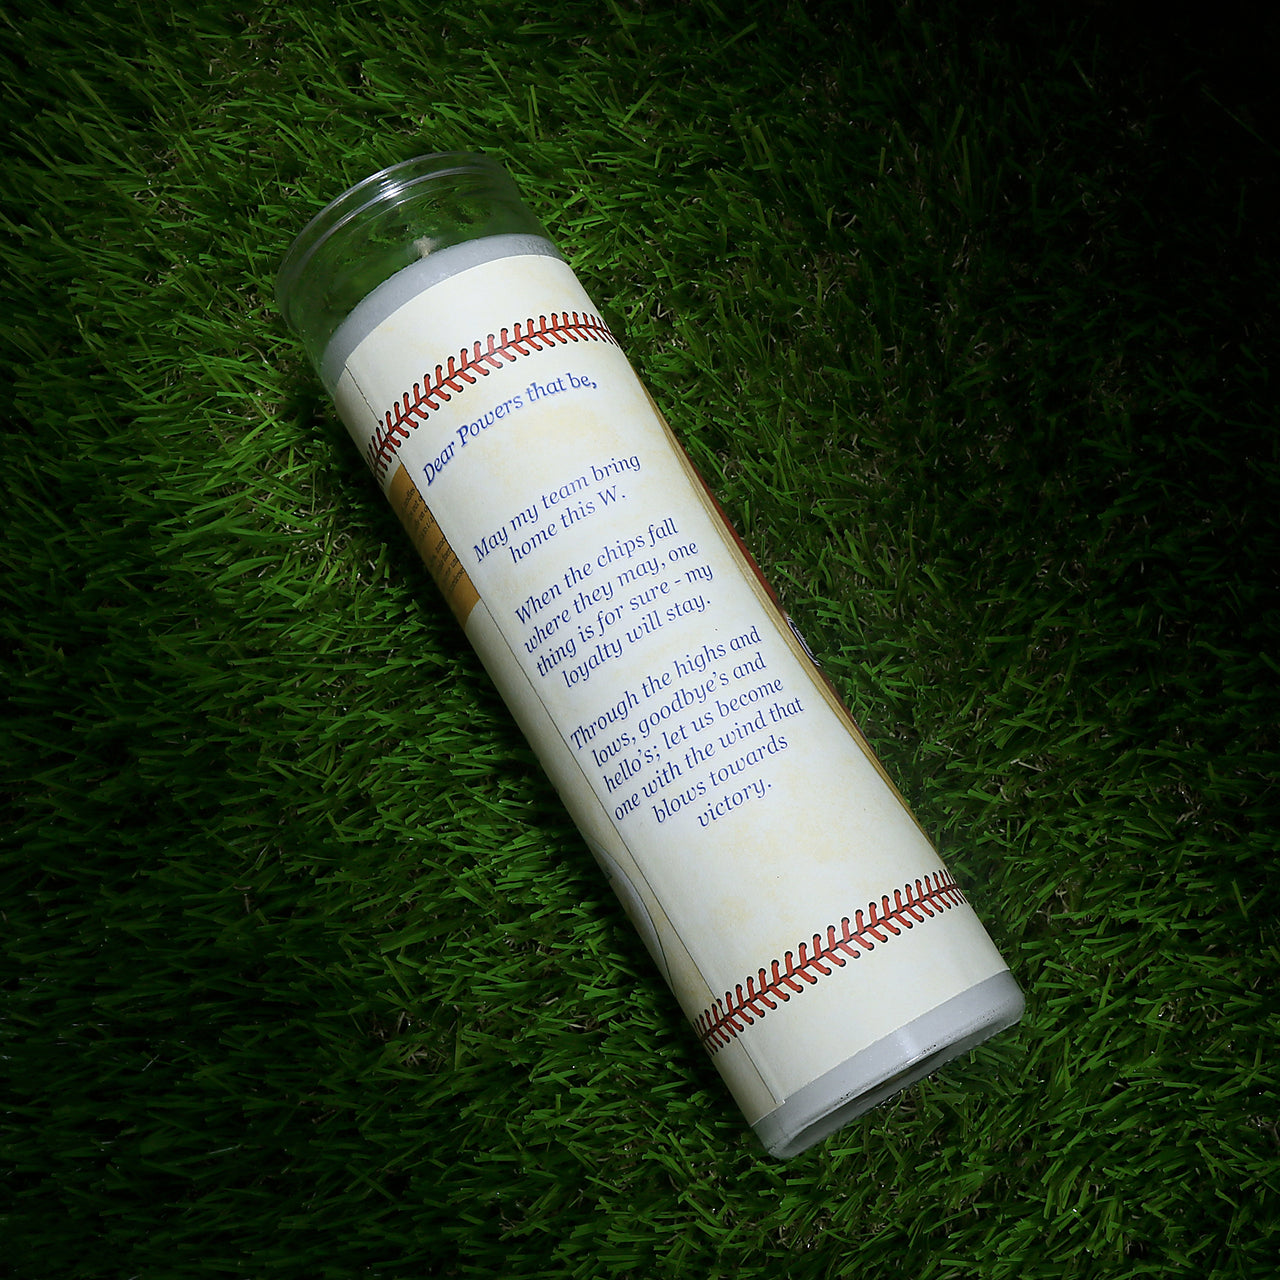 The backside of the Philadelphia Baseball Game Day Juju Unscented Prayer Candle